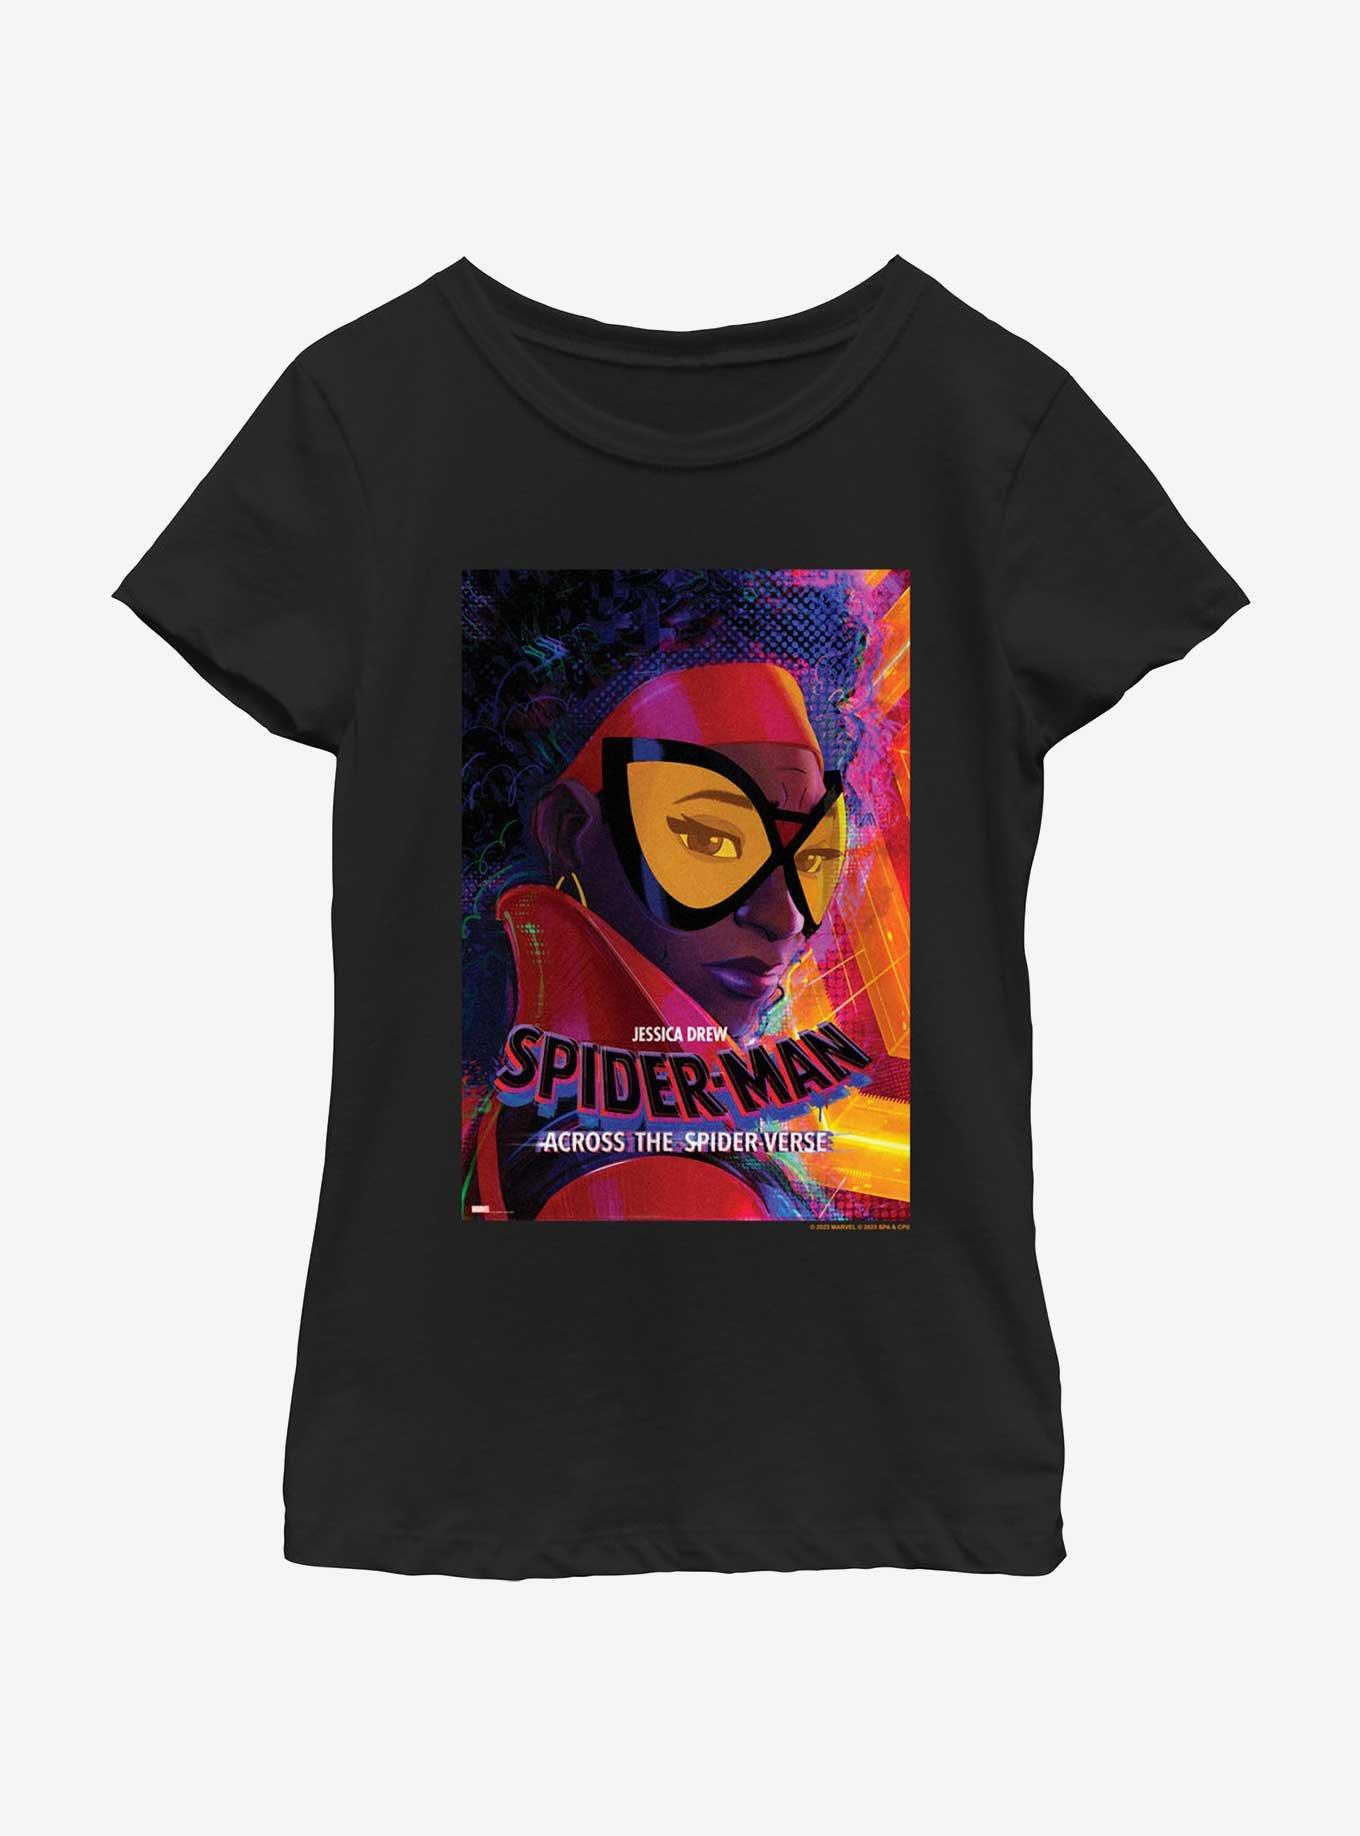 Spider-Man: Across The Spider-Verse Jessica Drew Spider-Woman Poster Youth Girls T-Shirt, BLACK, hi-res